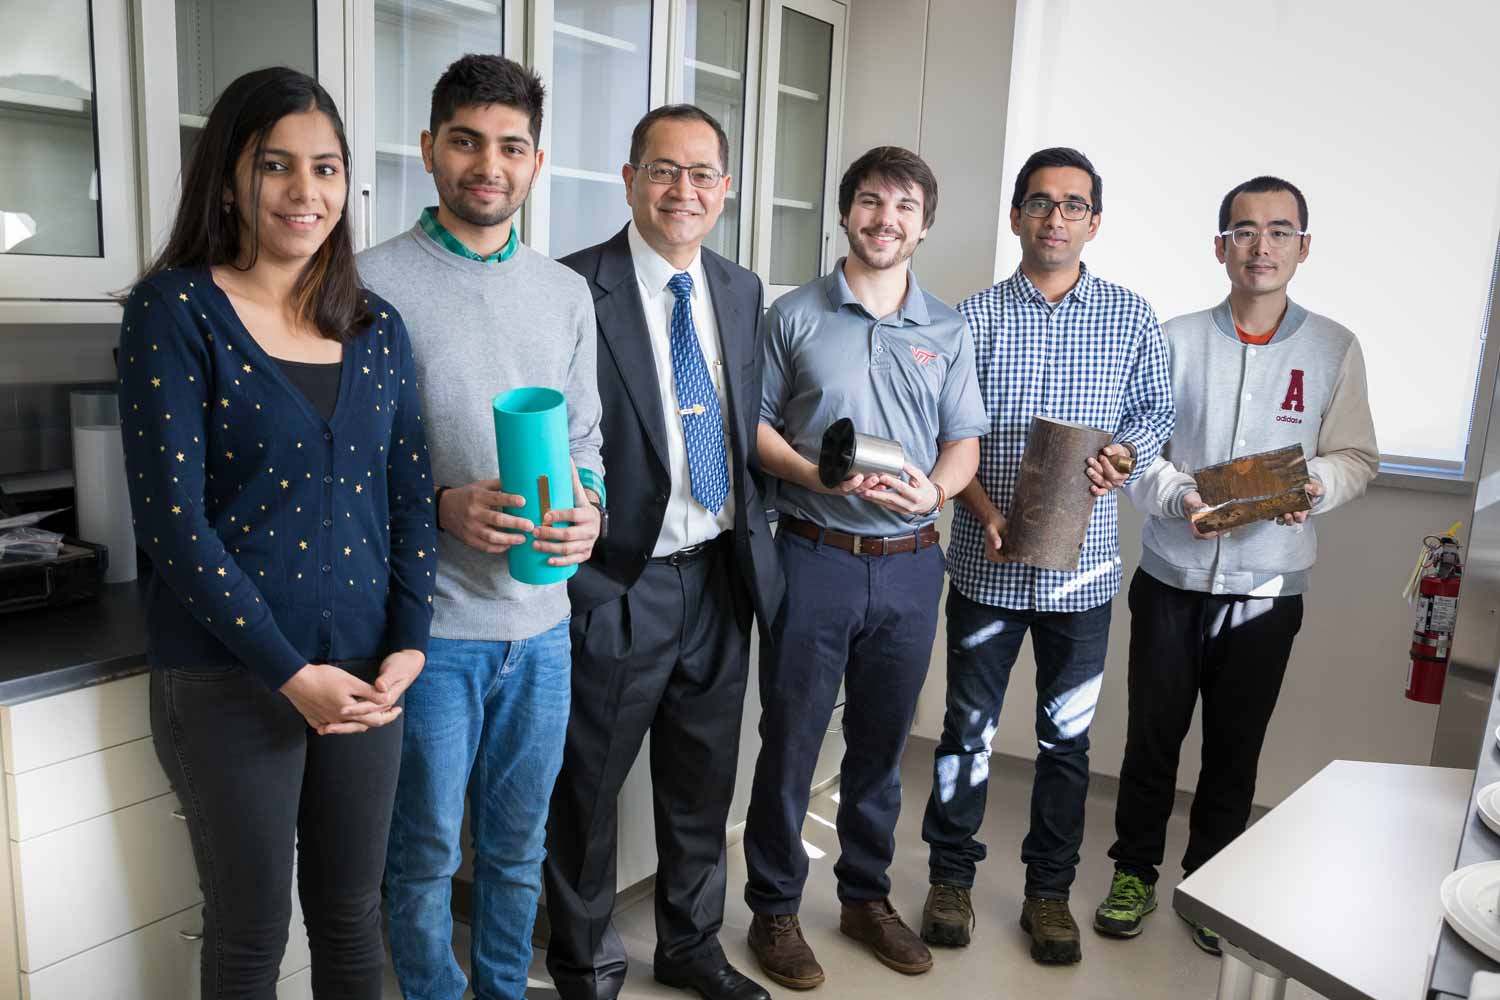 Sunhil Sinha and his research students